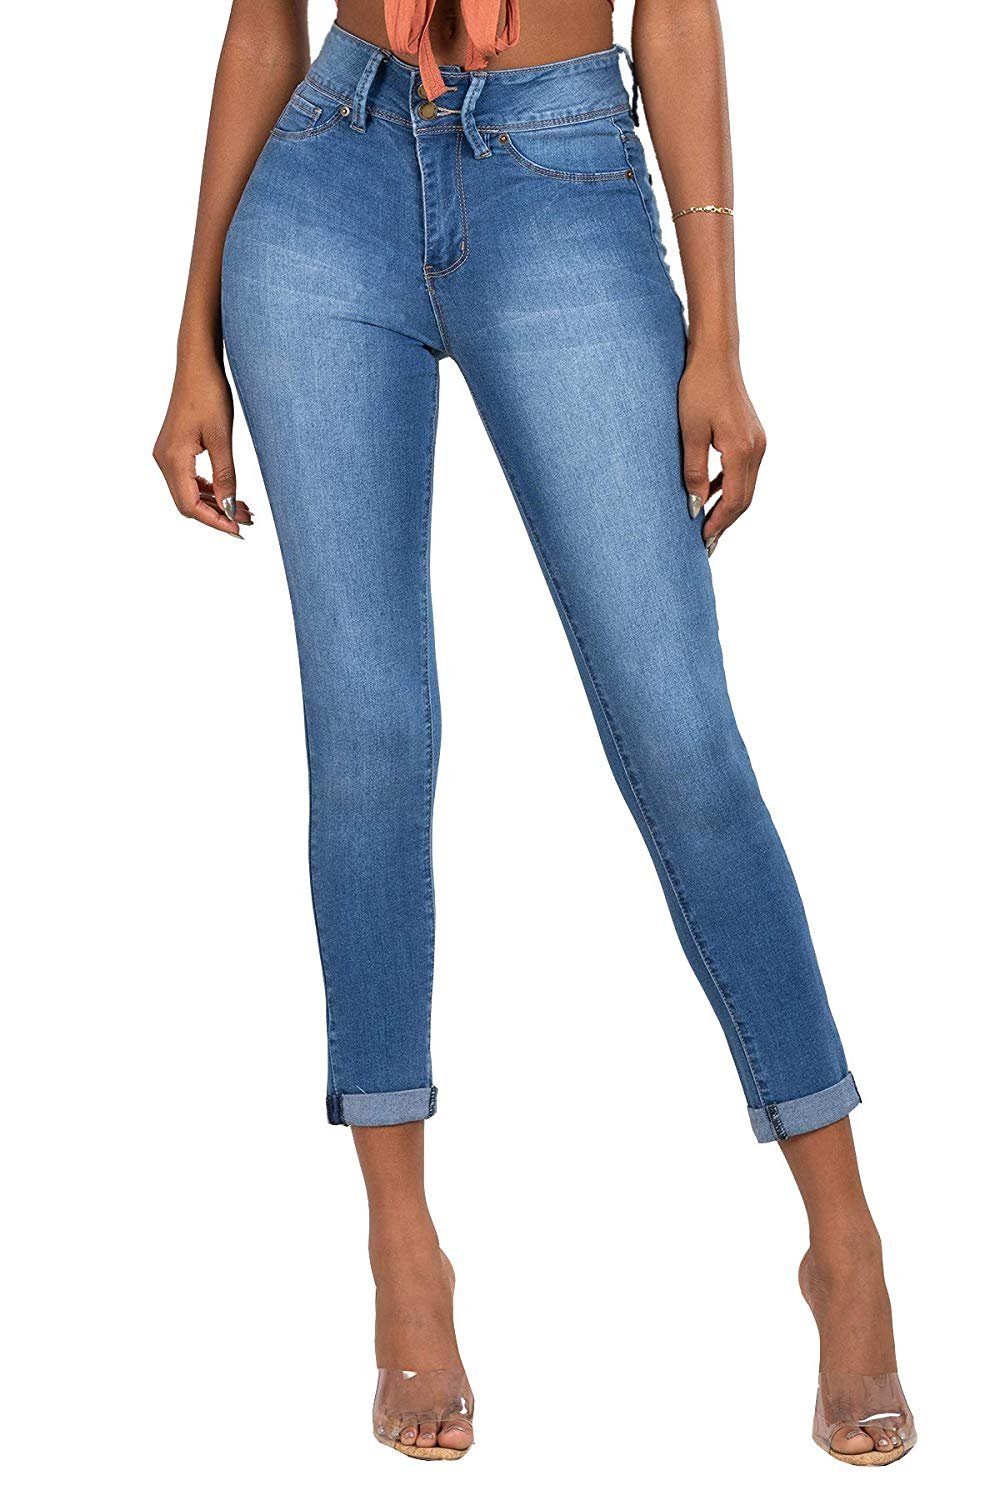 Junior Super Soft 2-Button Mid-Rise Rolled Cuff Ankle Jean